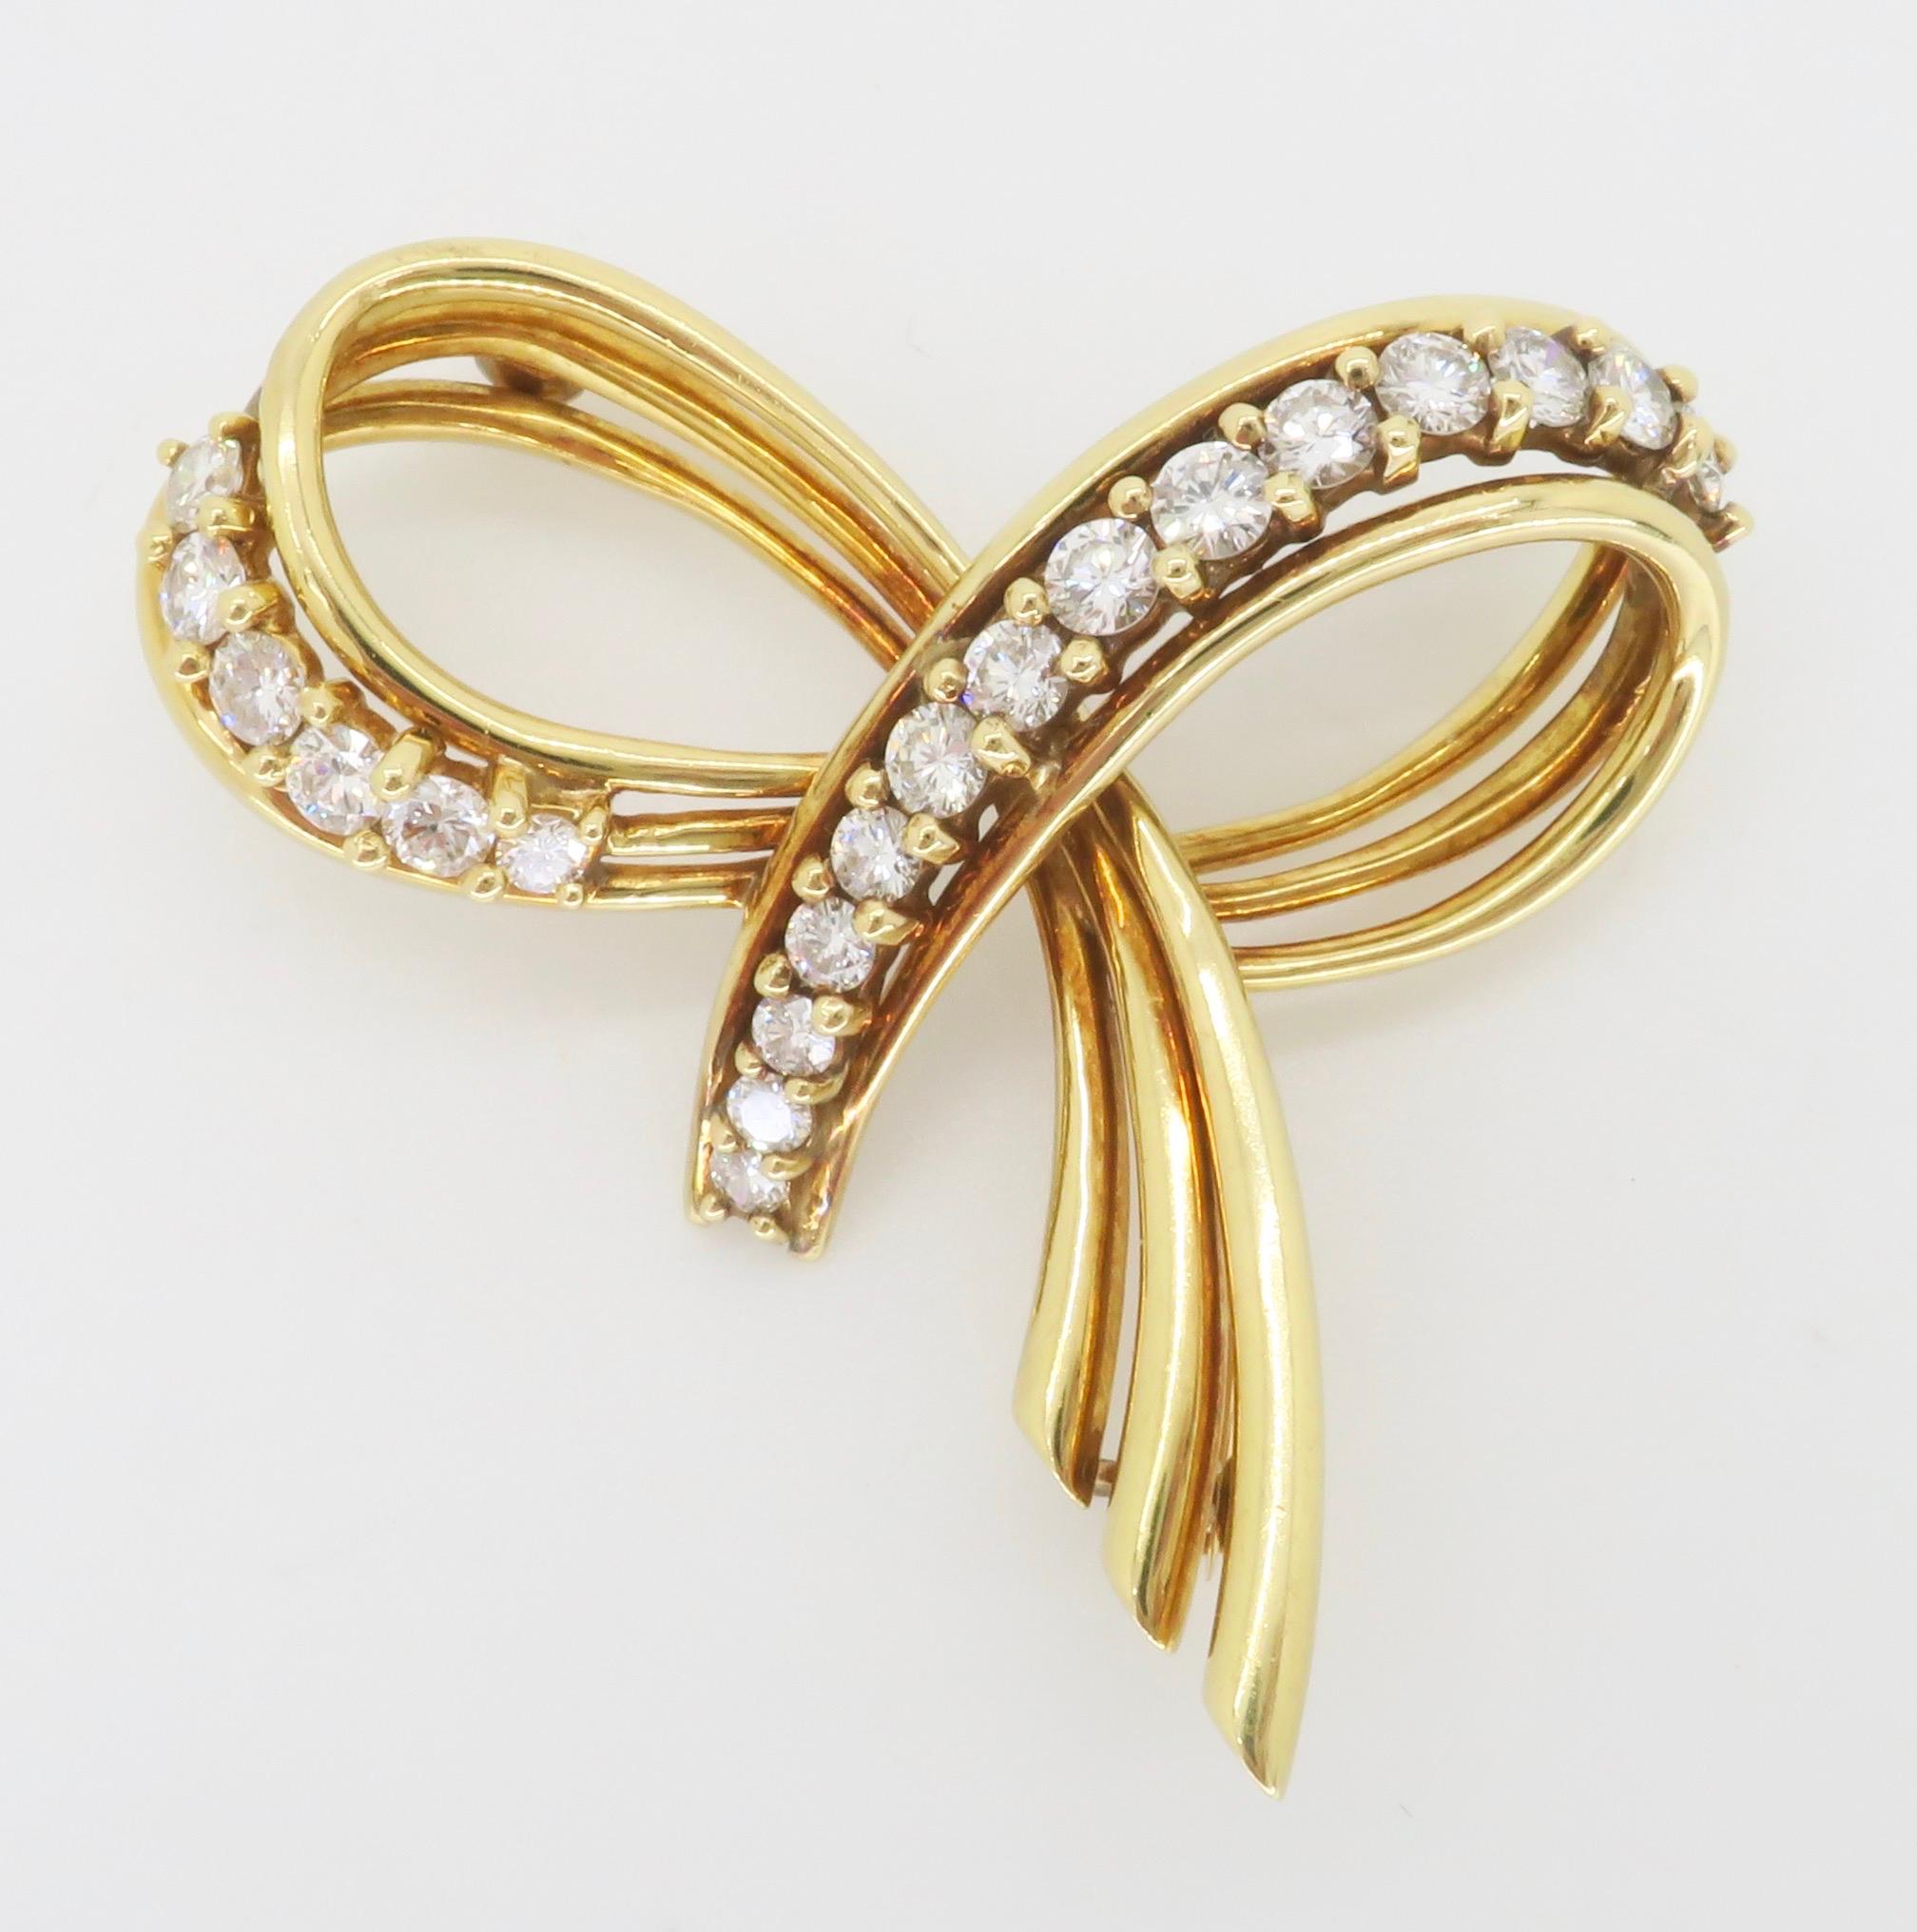 Vintage Tiffany & Co. Diamond Bow Brooch in 18k Yellow Gold  For Sale 2